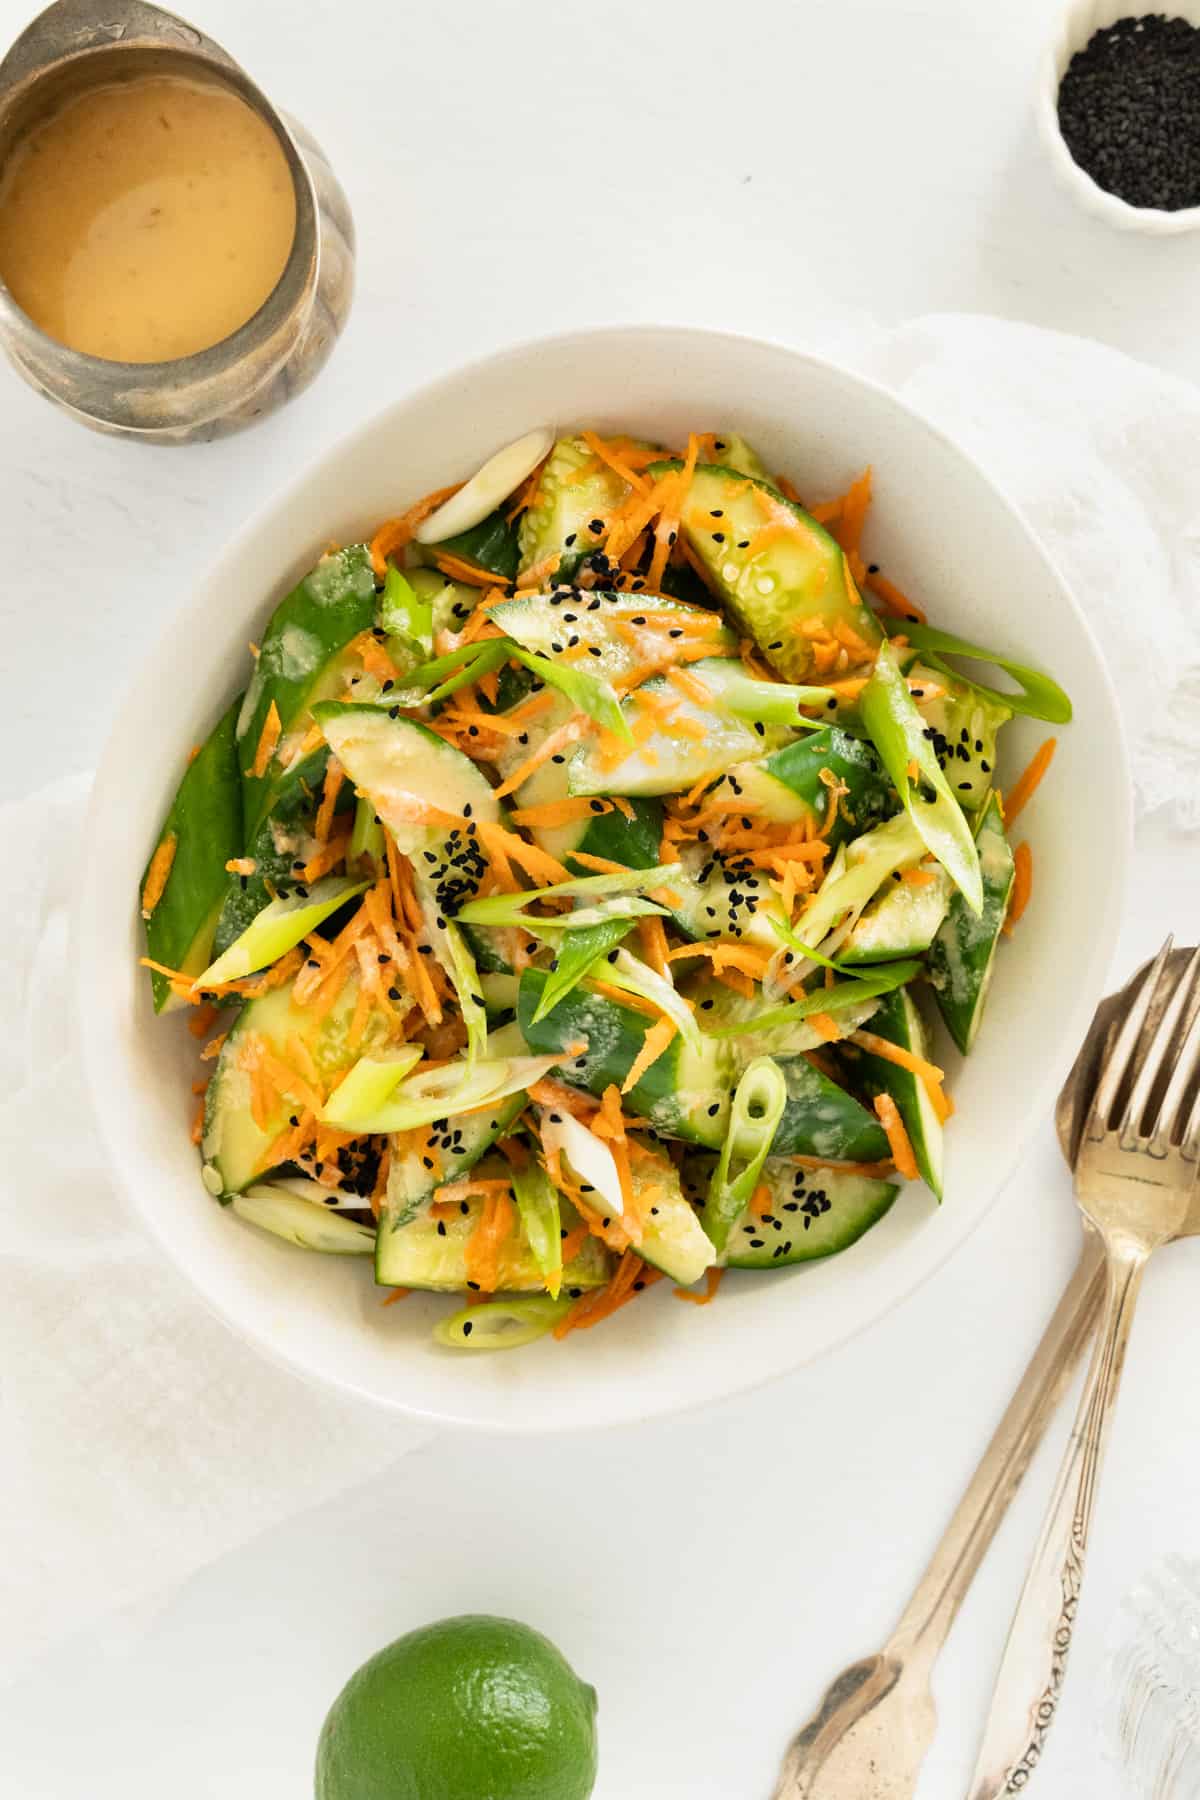 a bowl of green and orange salad with brownish tahini dressing on the side